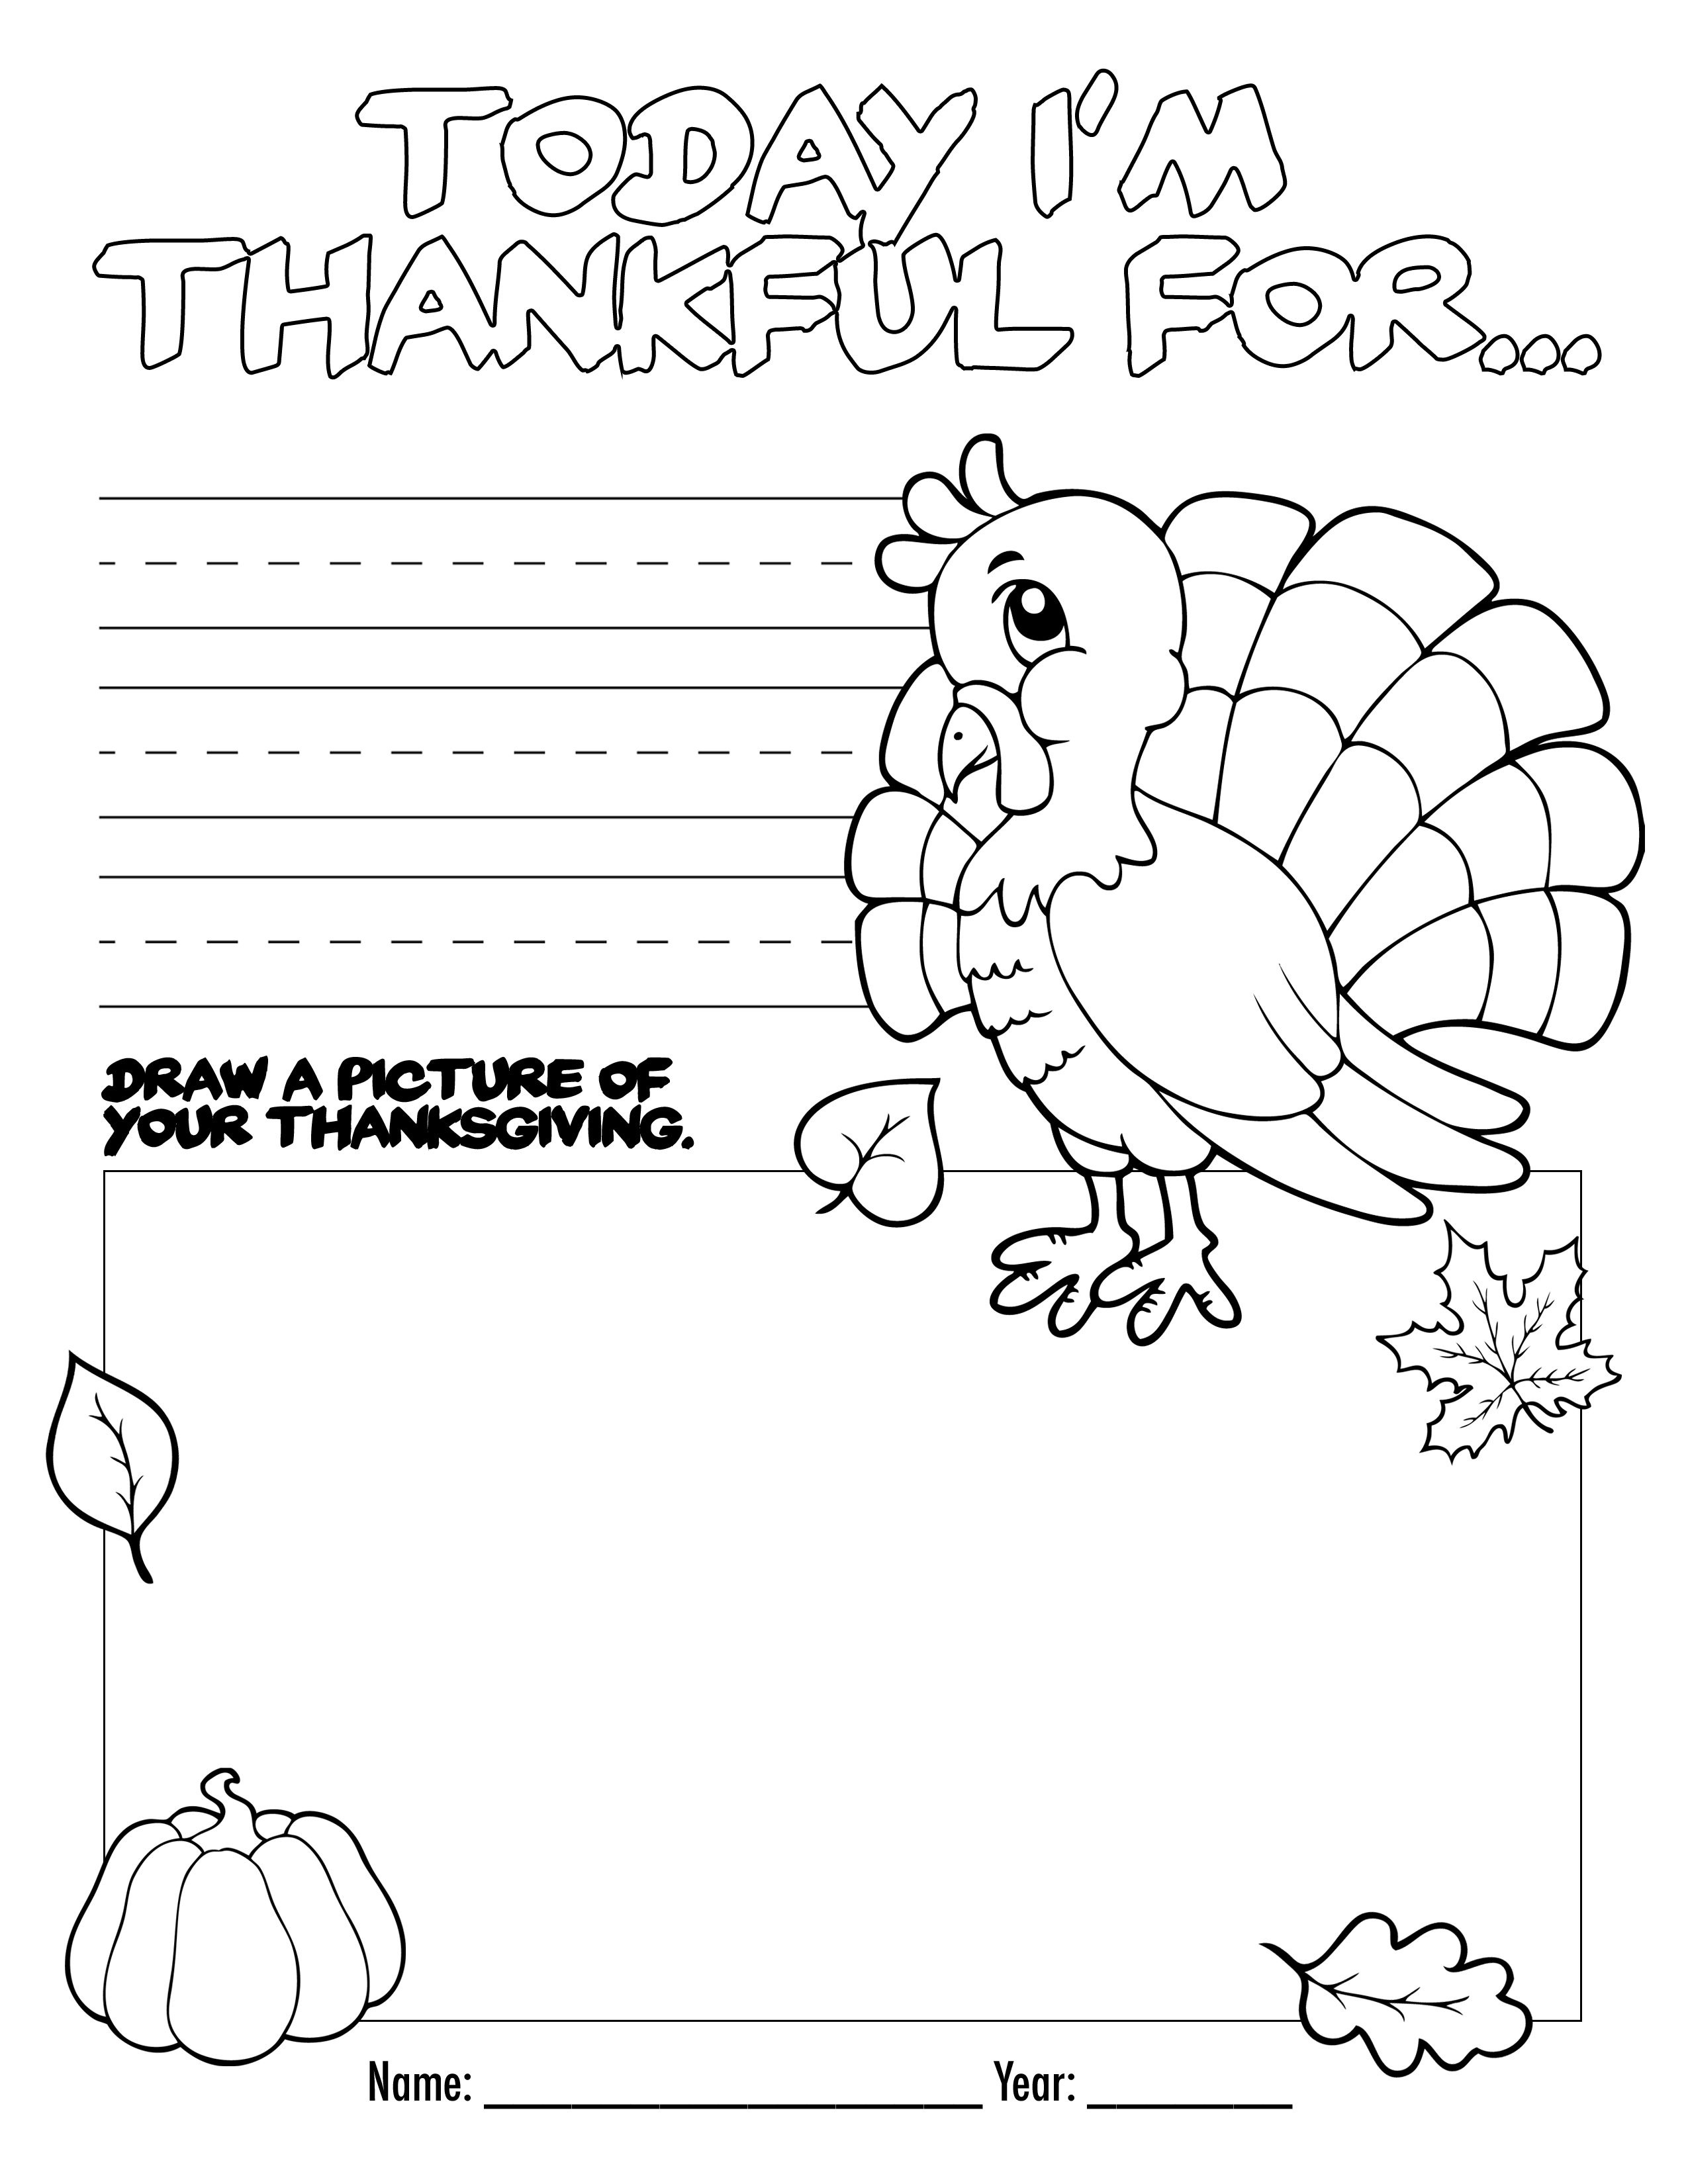 Thanksgiving Coloring Book Free Printable For The Kids! | Bloggers - Free Printable Thanksgiving Activities